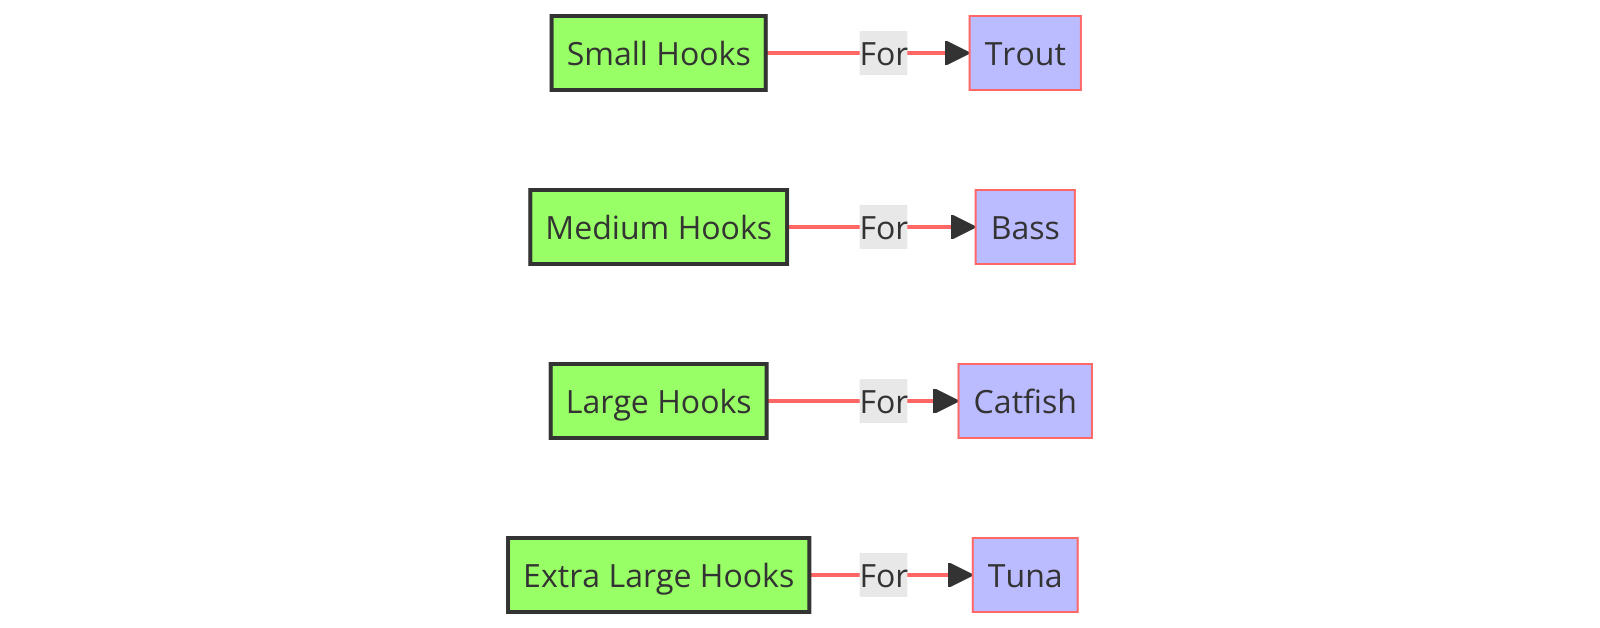 the comparison of hook sizes to the type of fish they are most effective for